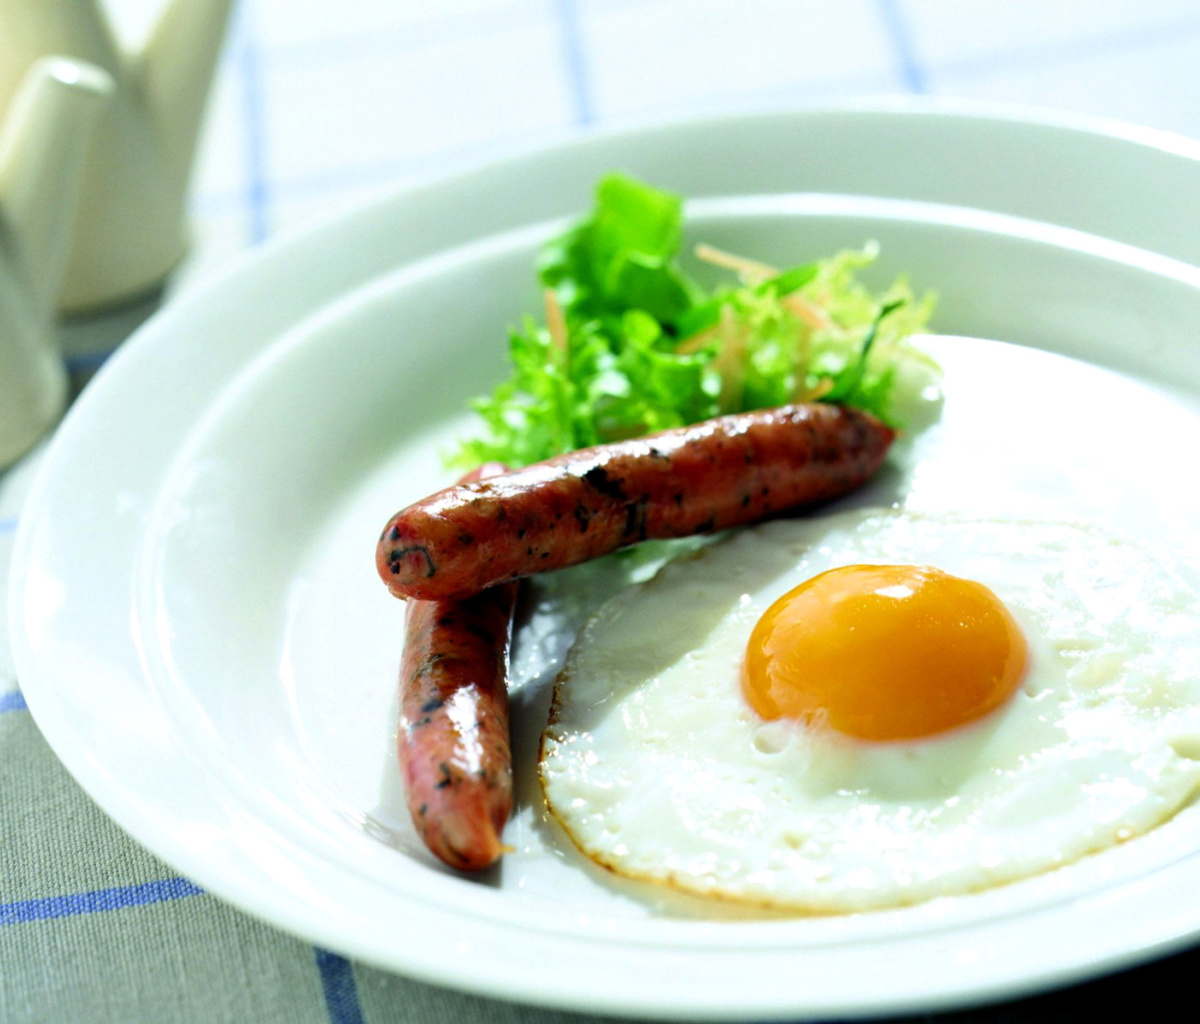 Breakfast with Sausage wallpaper 1200x1024